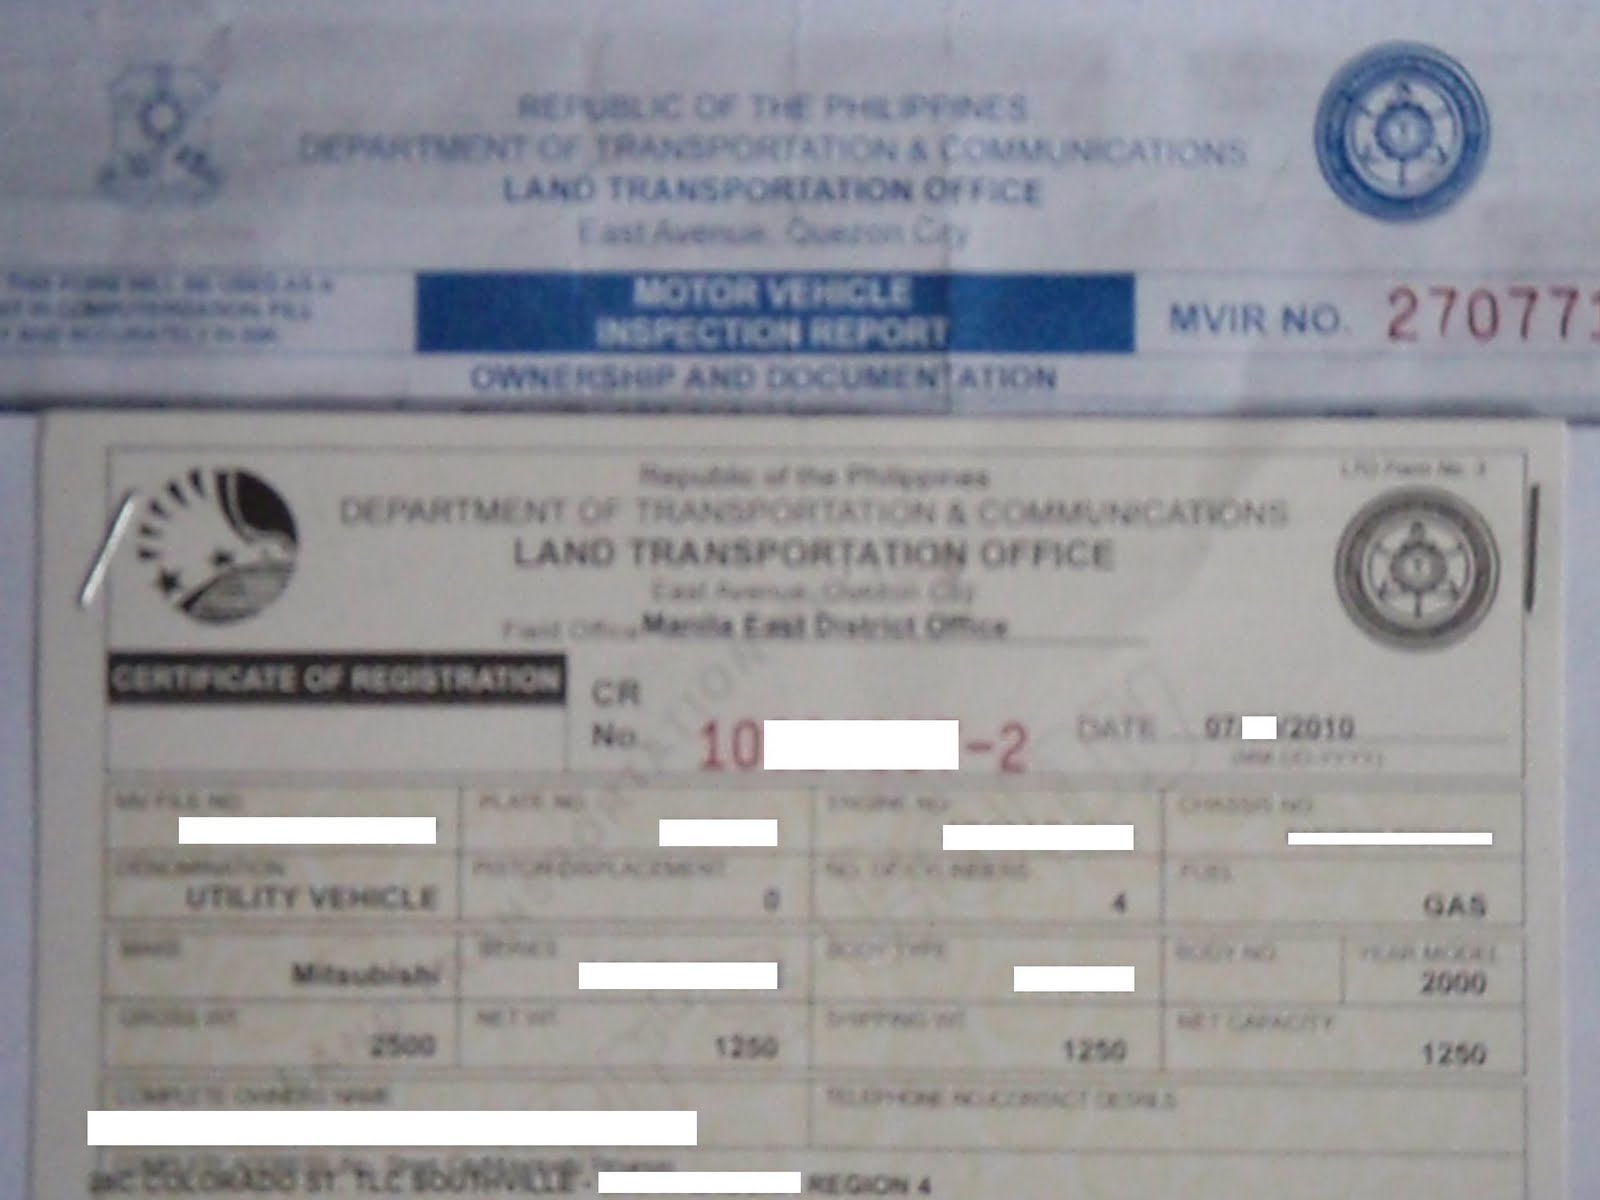 Noelizm Vehicle Registration In Lto with dimensions 1600 X 1200